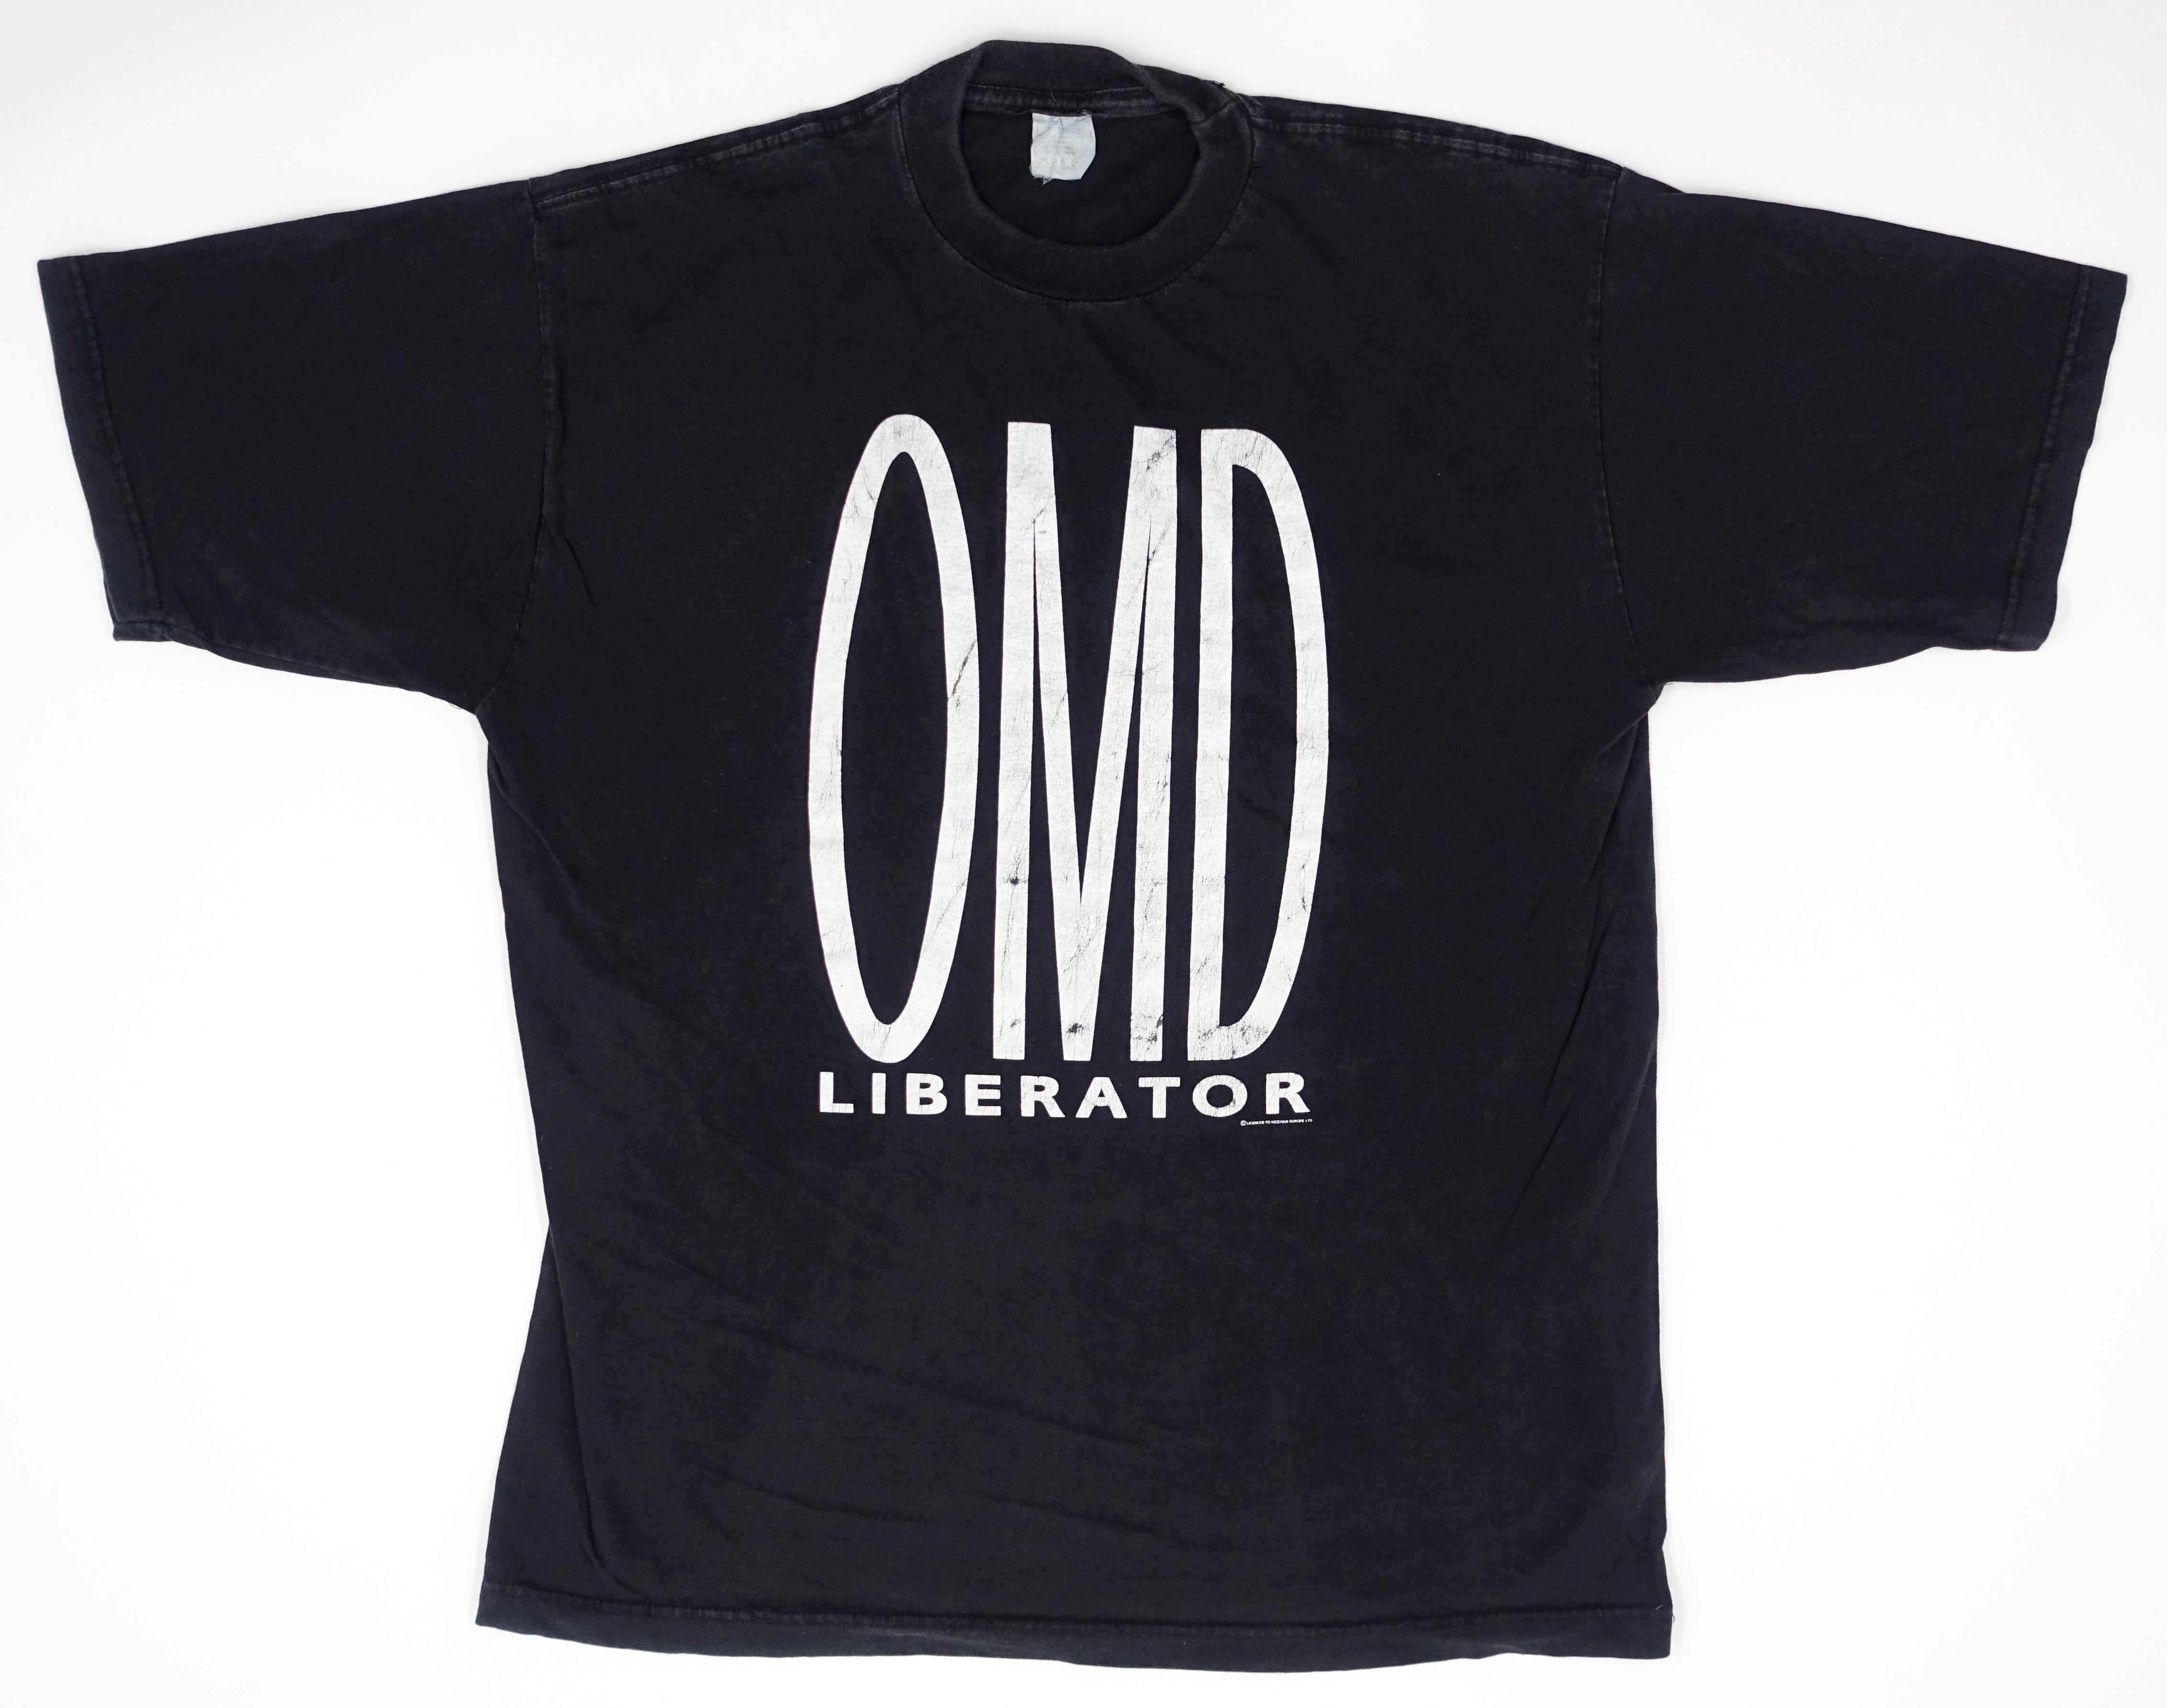 Orchestral Manoeuvres In The Dark (OMD) - Liberator 1993 EU Tour Shirt Size XL